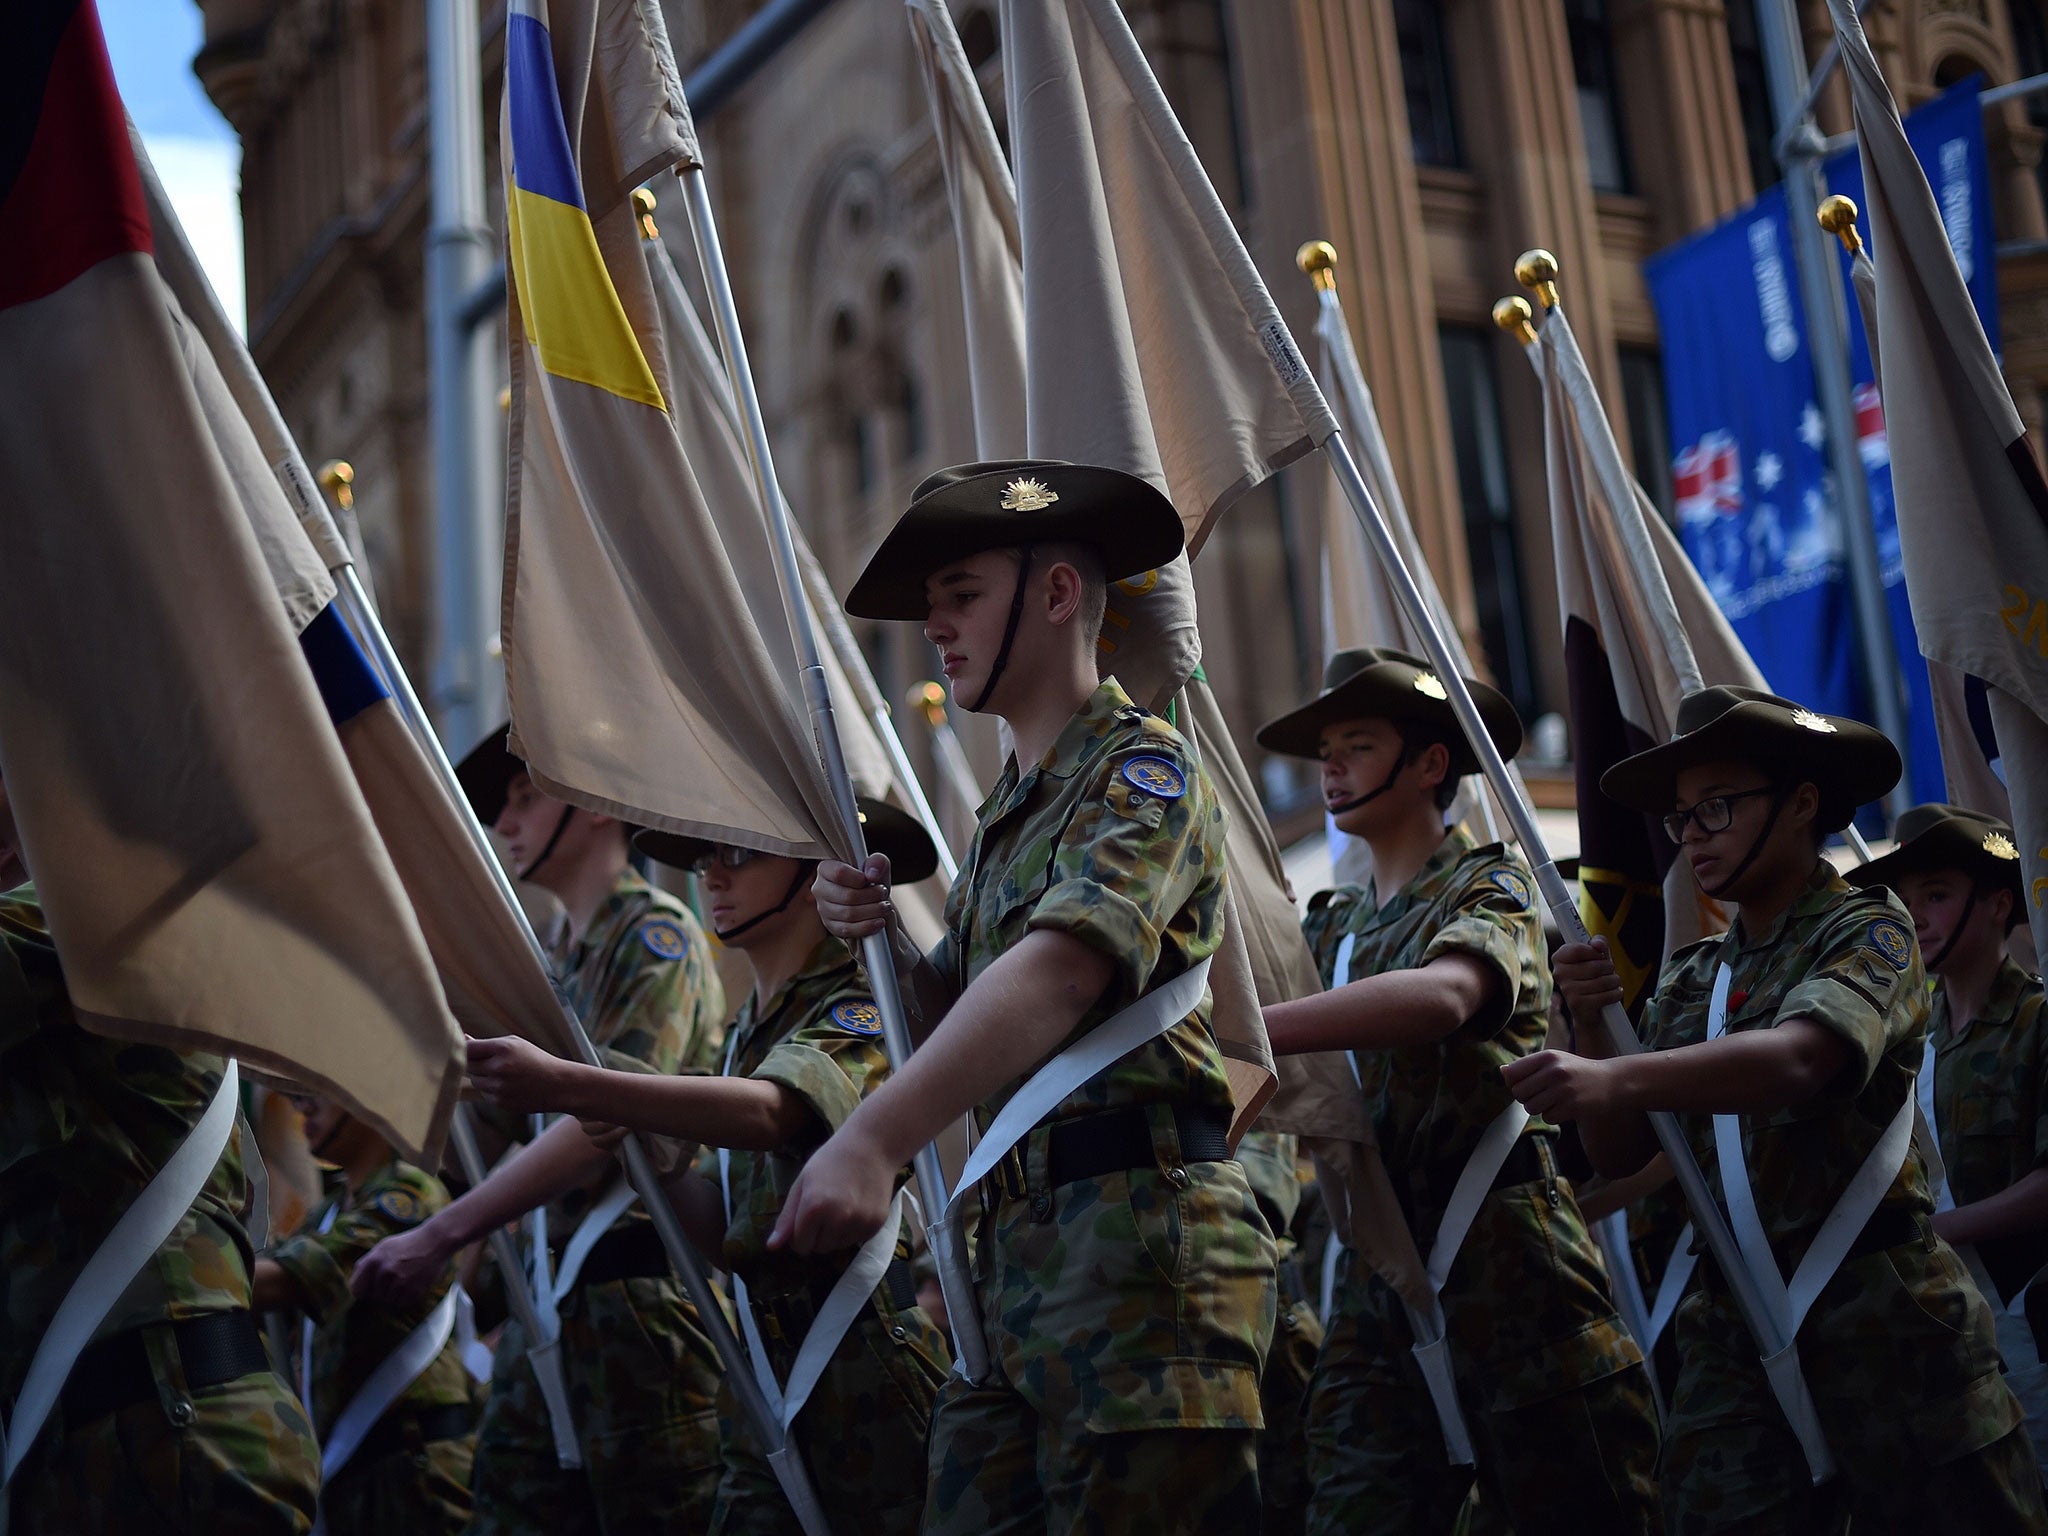 An Anzac Day parade in Sydney; the defendant exchanged messages with Sevdet Besim, who allegedly planned to attack one